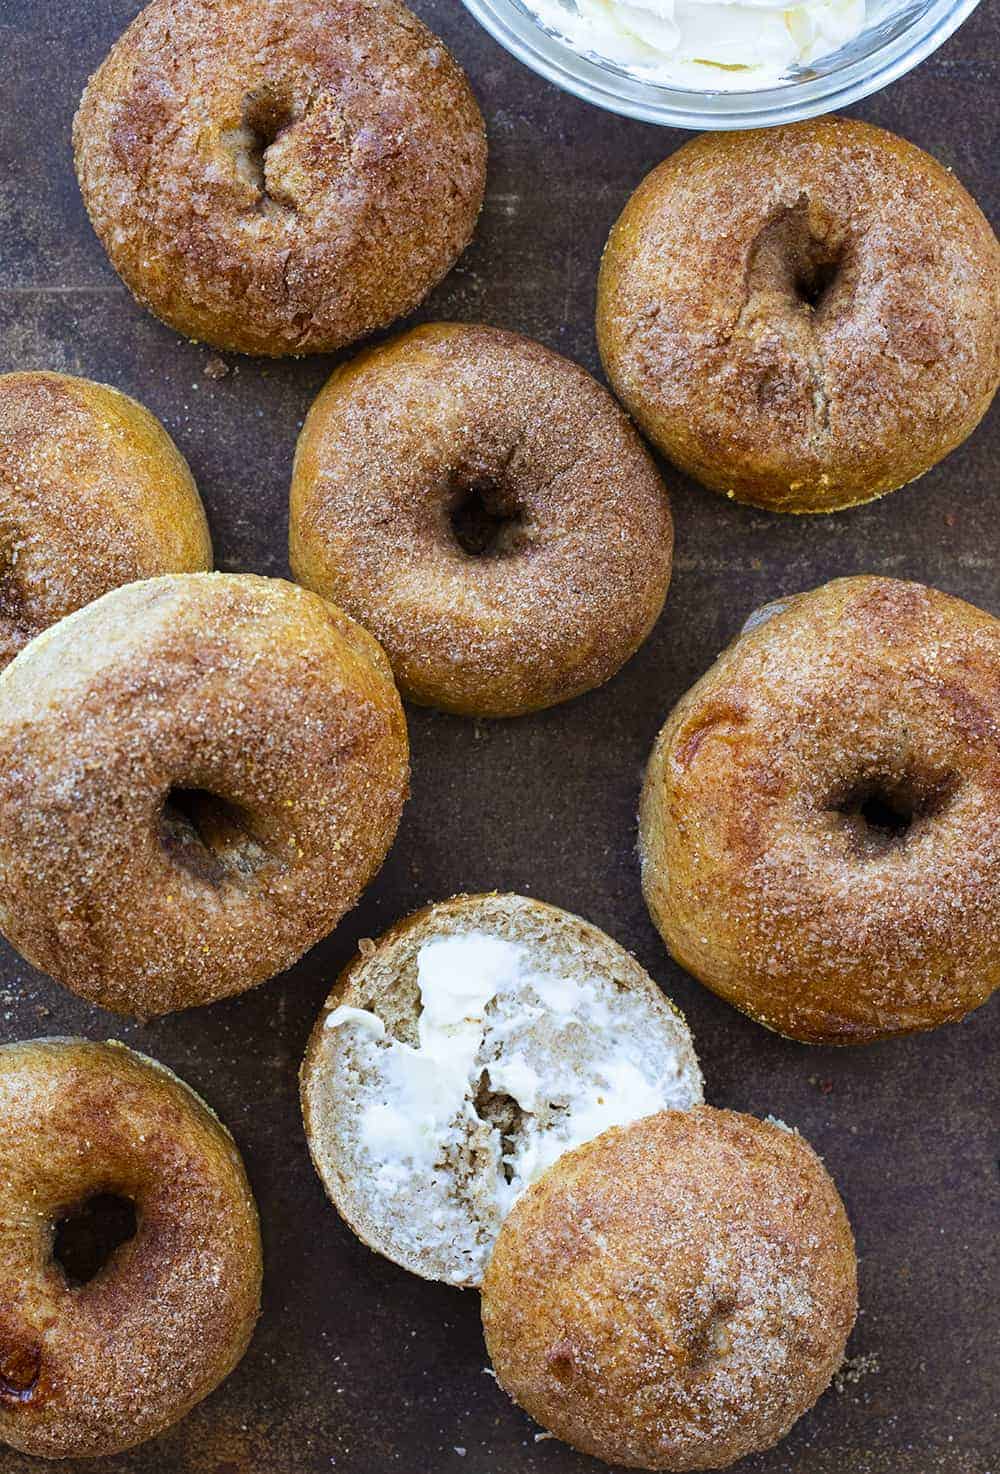 Overhead of Cinnamon Sugar Bagels with One Cut Open and Has Cream Cheese on It